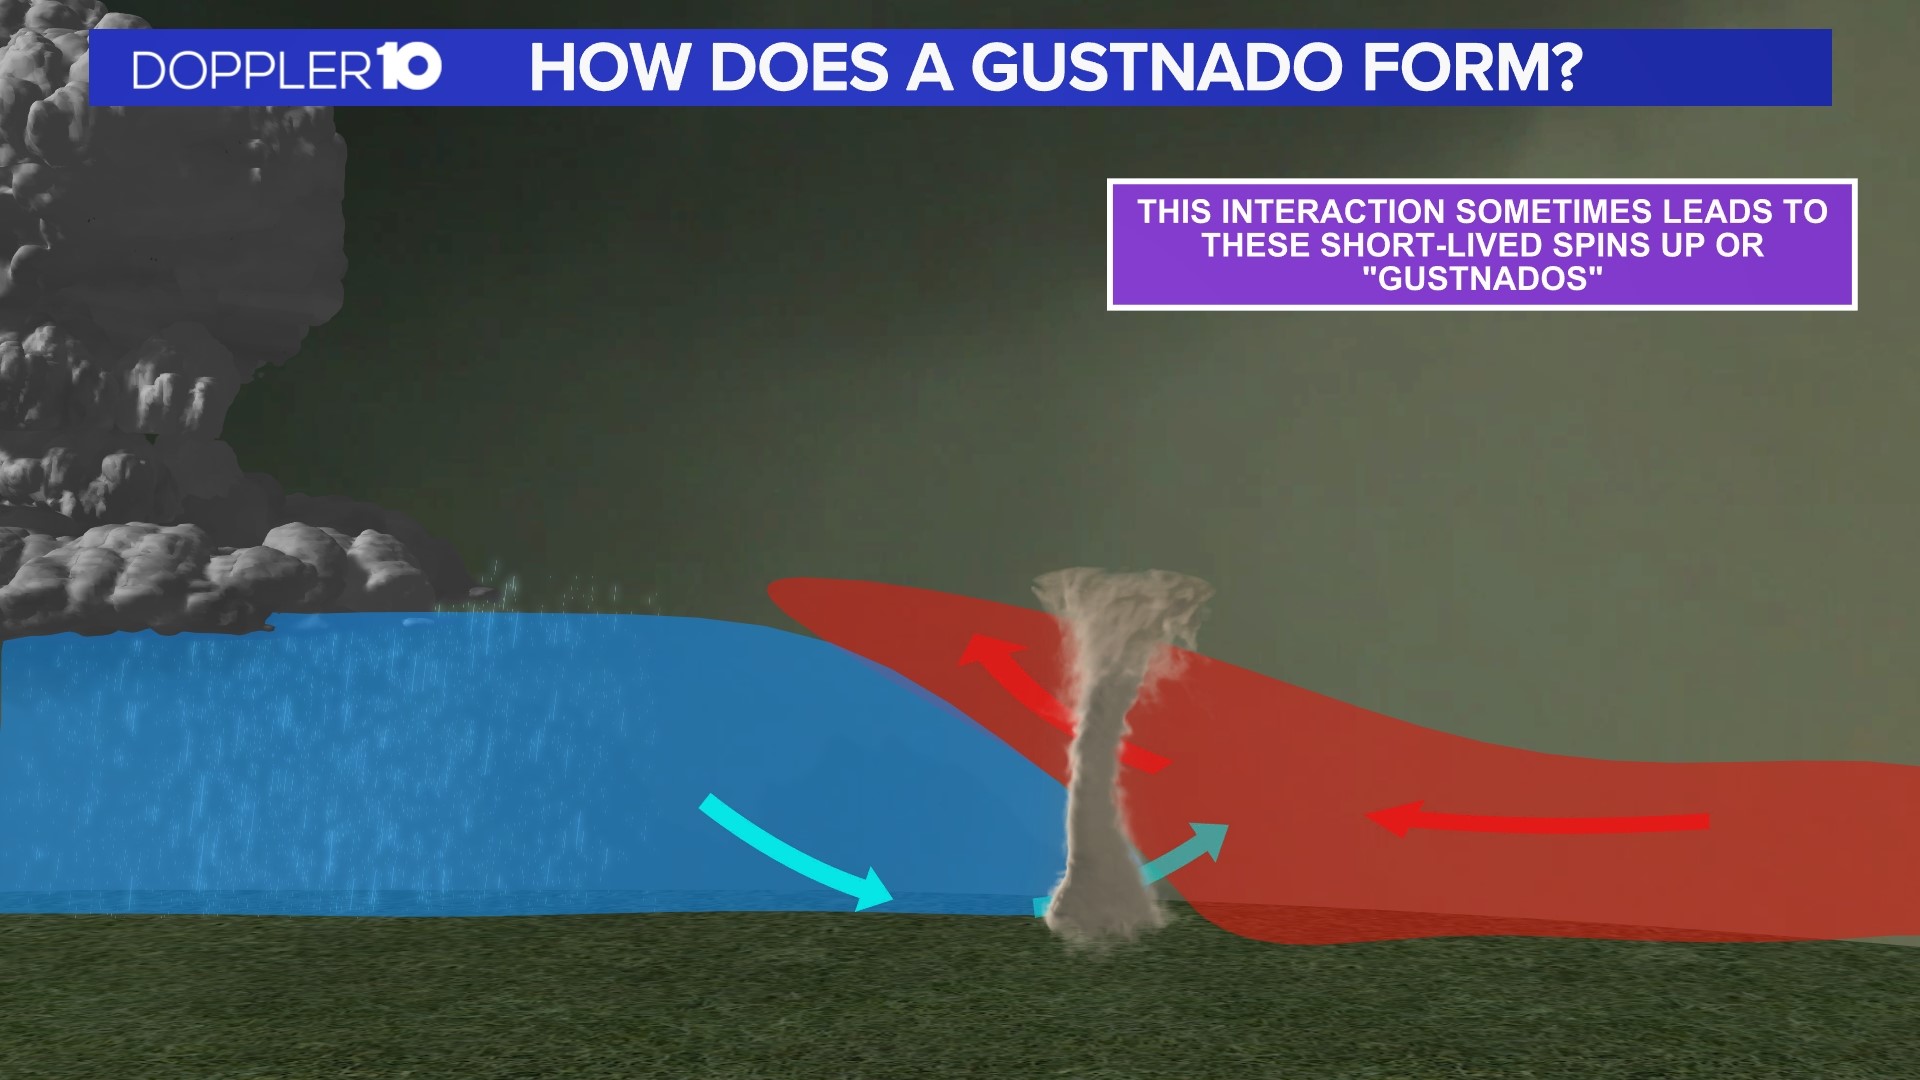 Strong storms over the weekend brought heavy rain, hail, strong winds, and something the NWS are calling a "Gustnado".